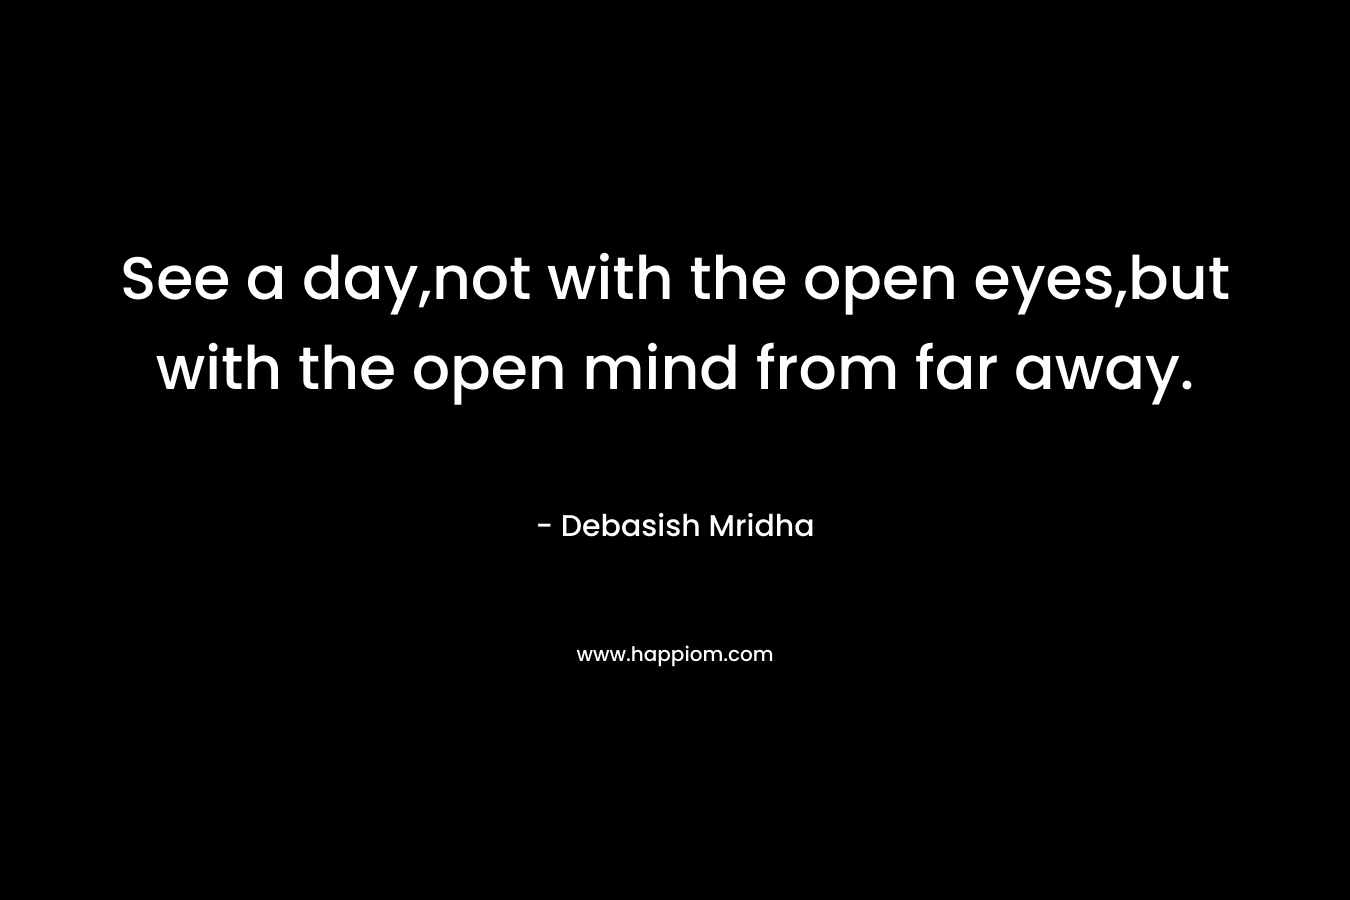 See a day,not with the open eyes,but with the open mind from far away.